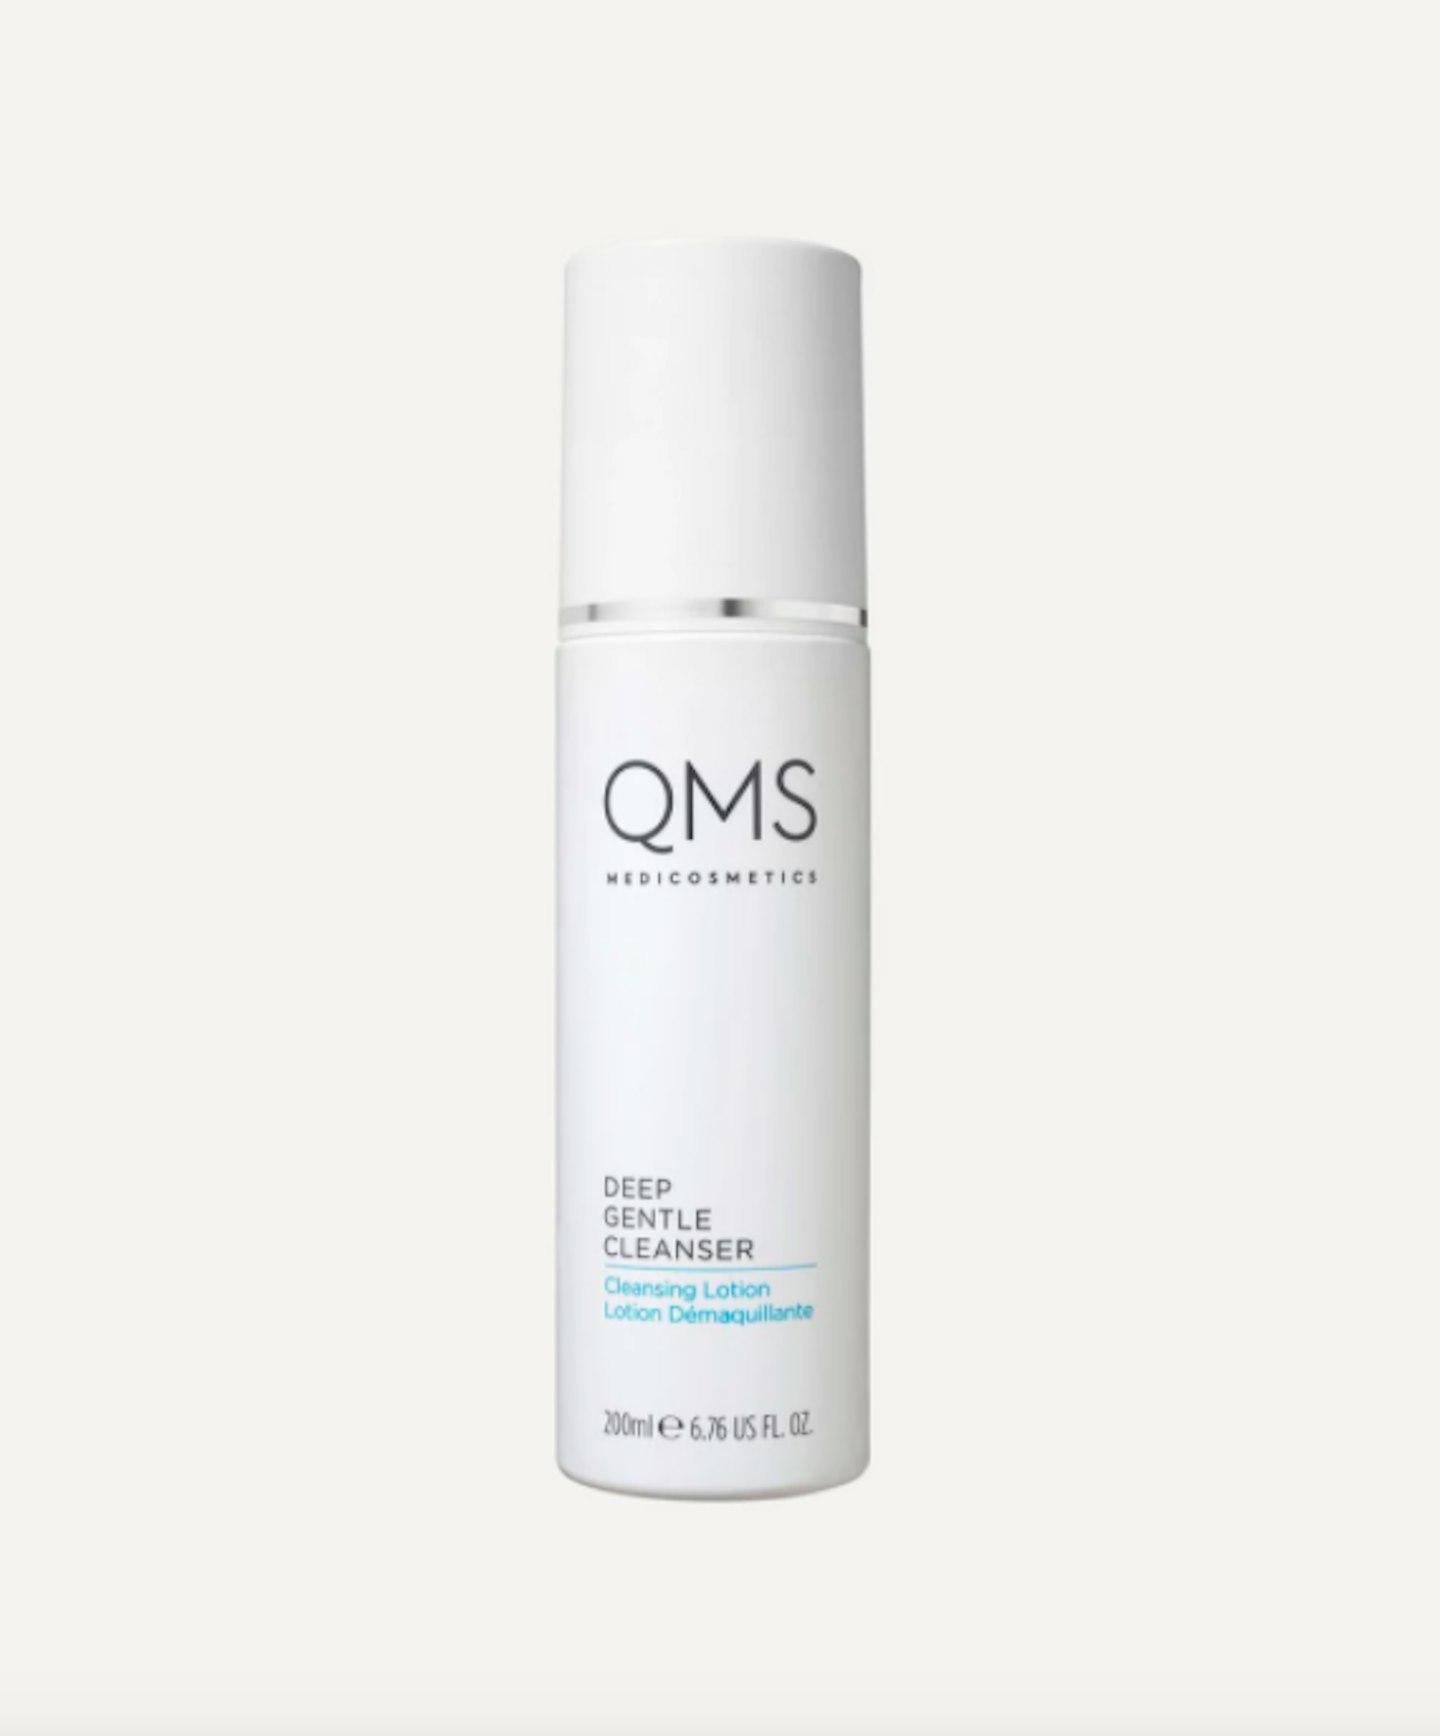 QMS Deep Gentle Cleanser, £38 at Liberty